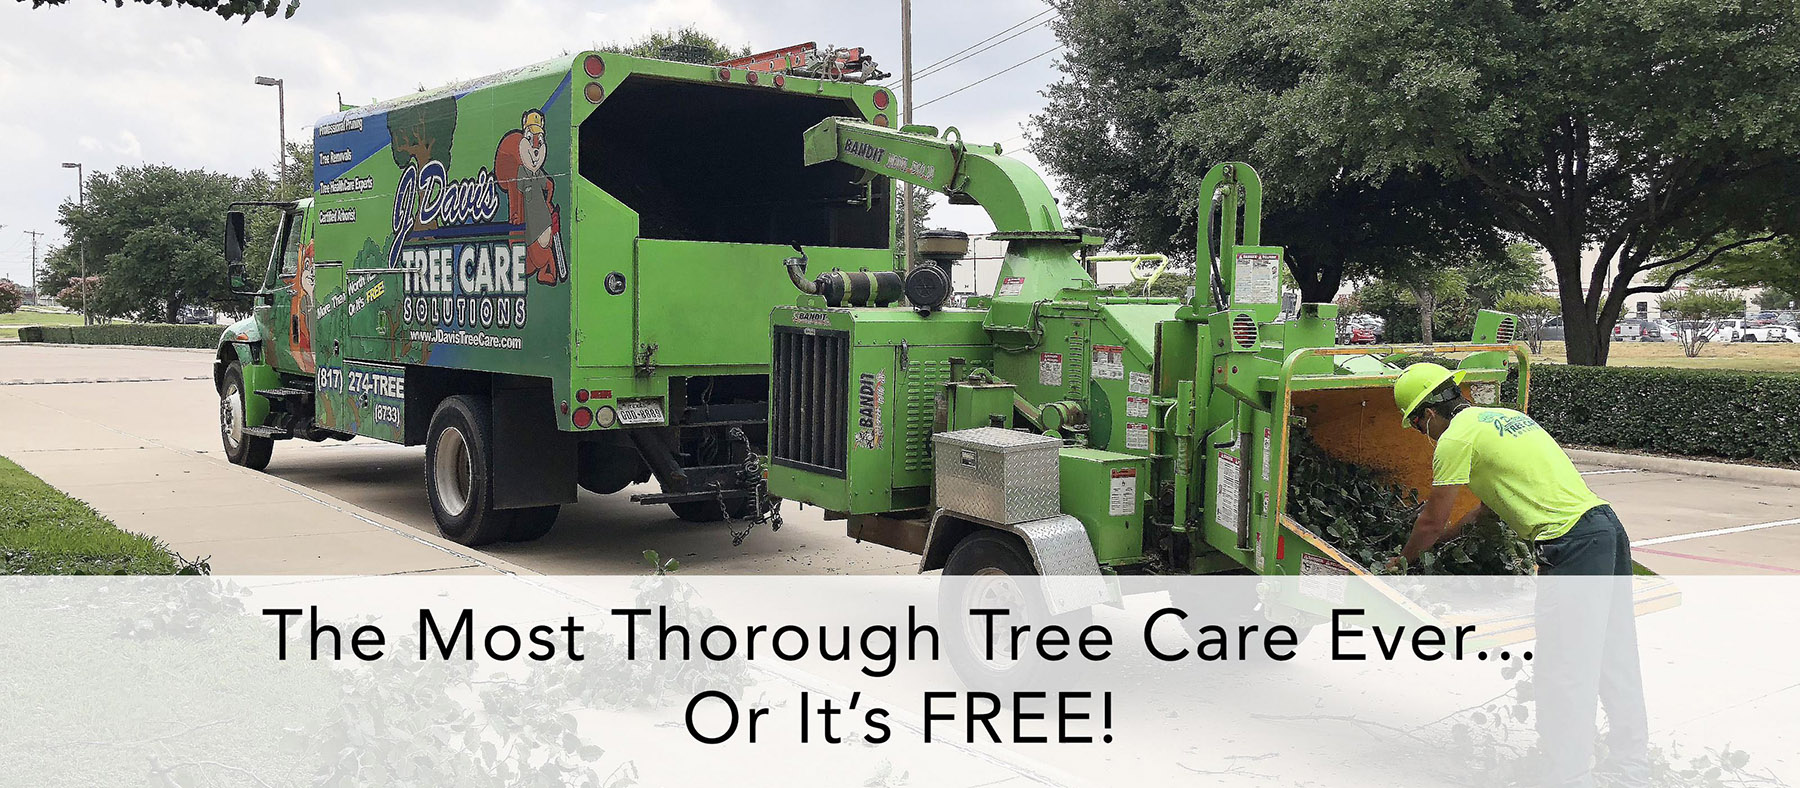 Get The Best Tree Care Services in Irving, TX